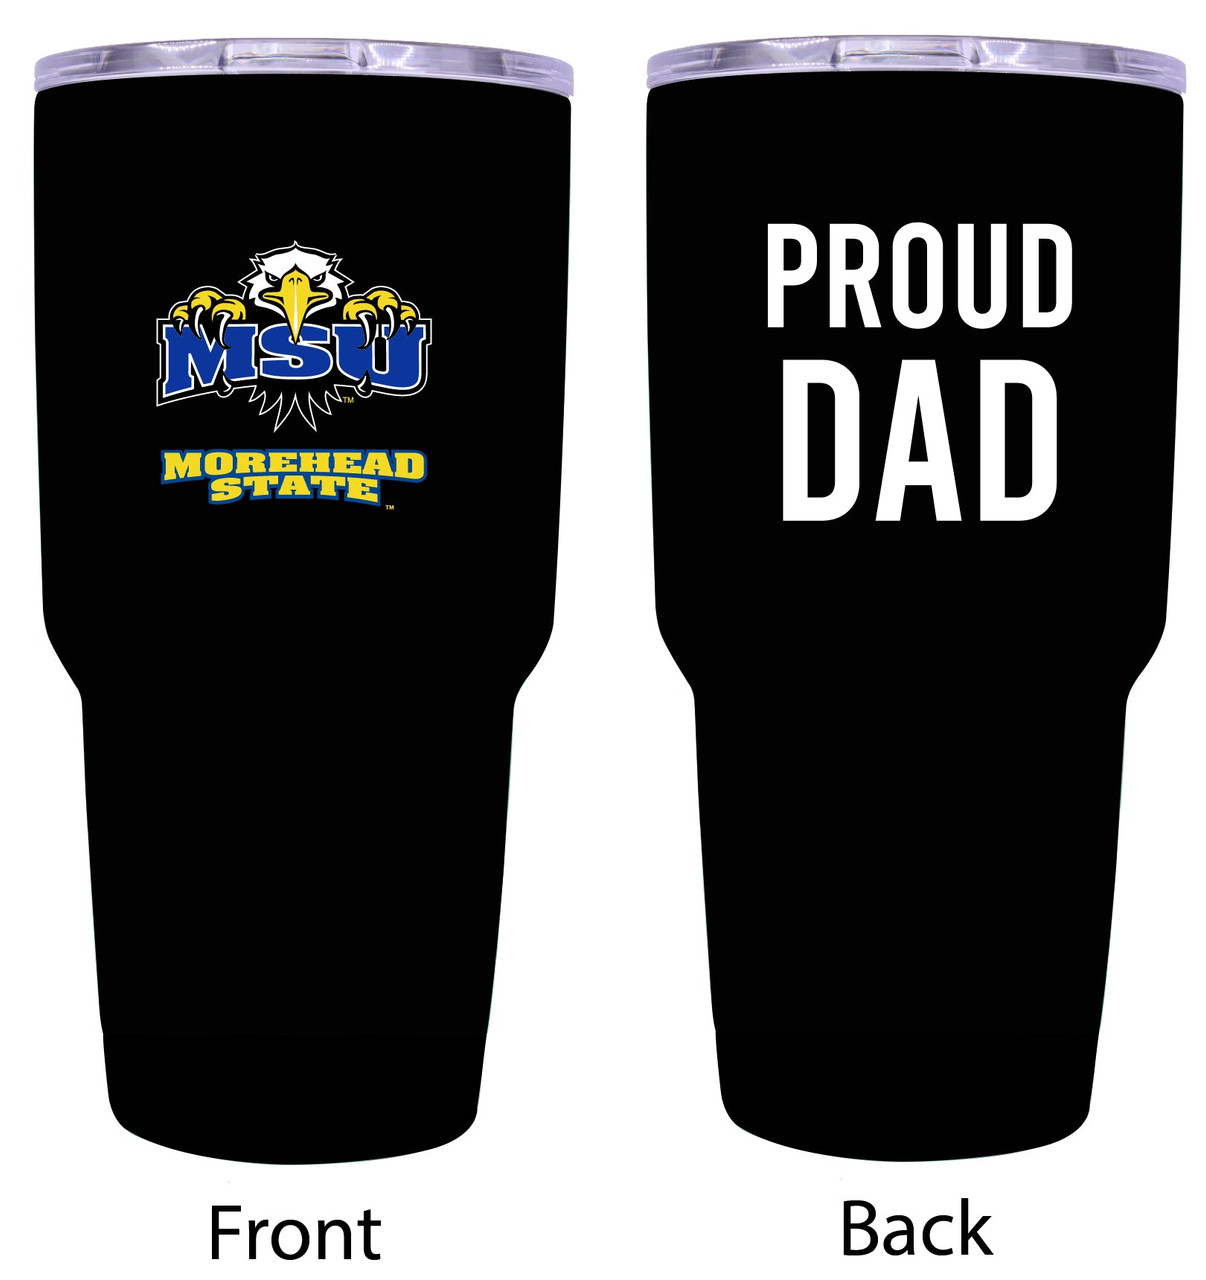 Morehead State University Proud Dad 24 oz Insulated Stainless Steel Tumblers Black.